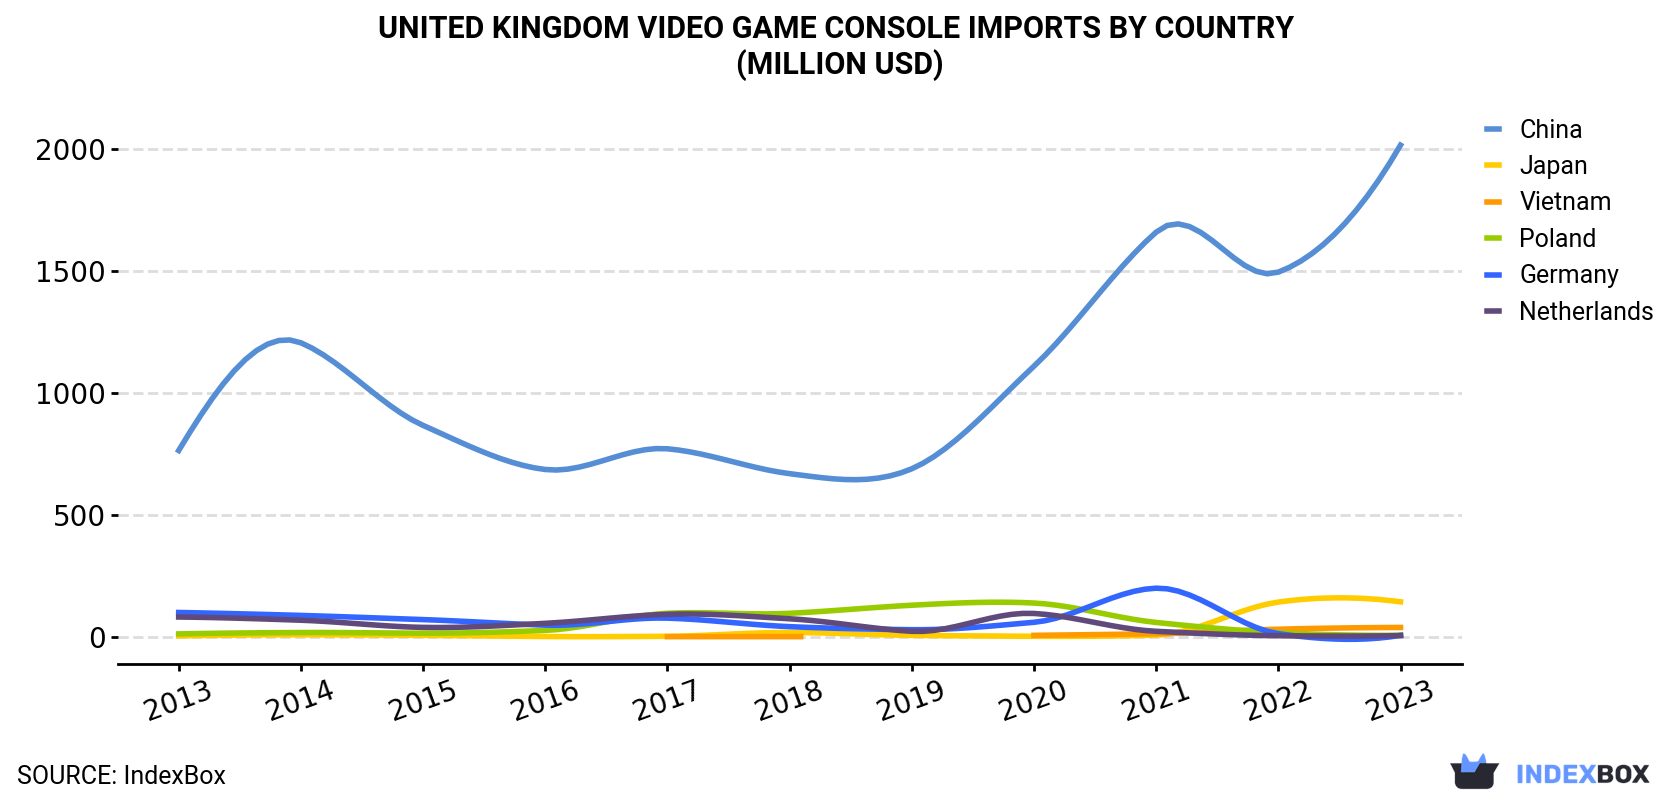 United Kingdom Video Game Console Imports By Country (Million USD)